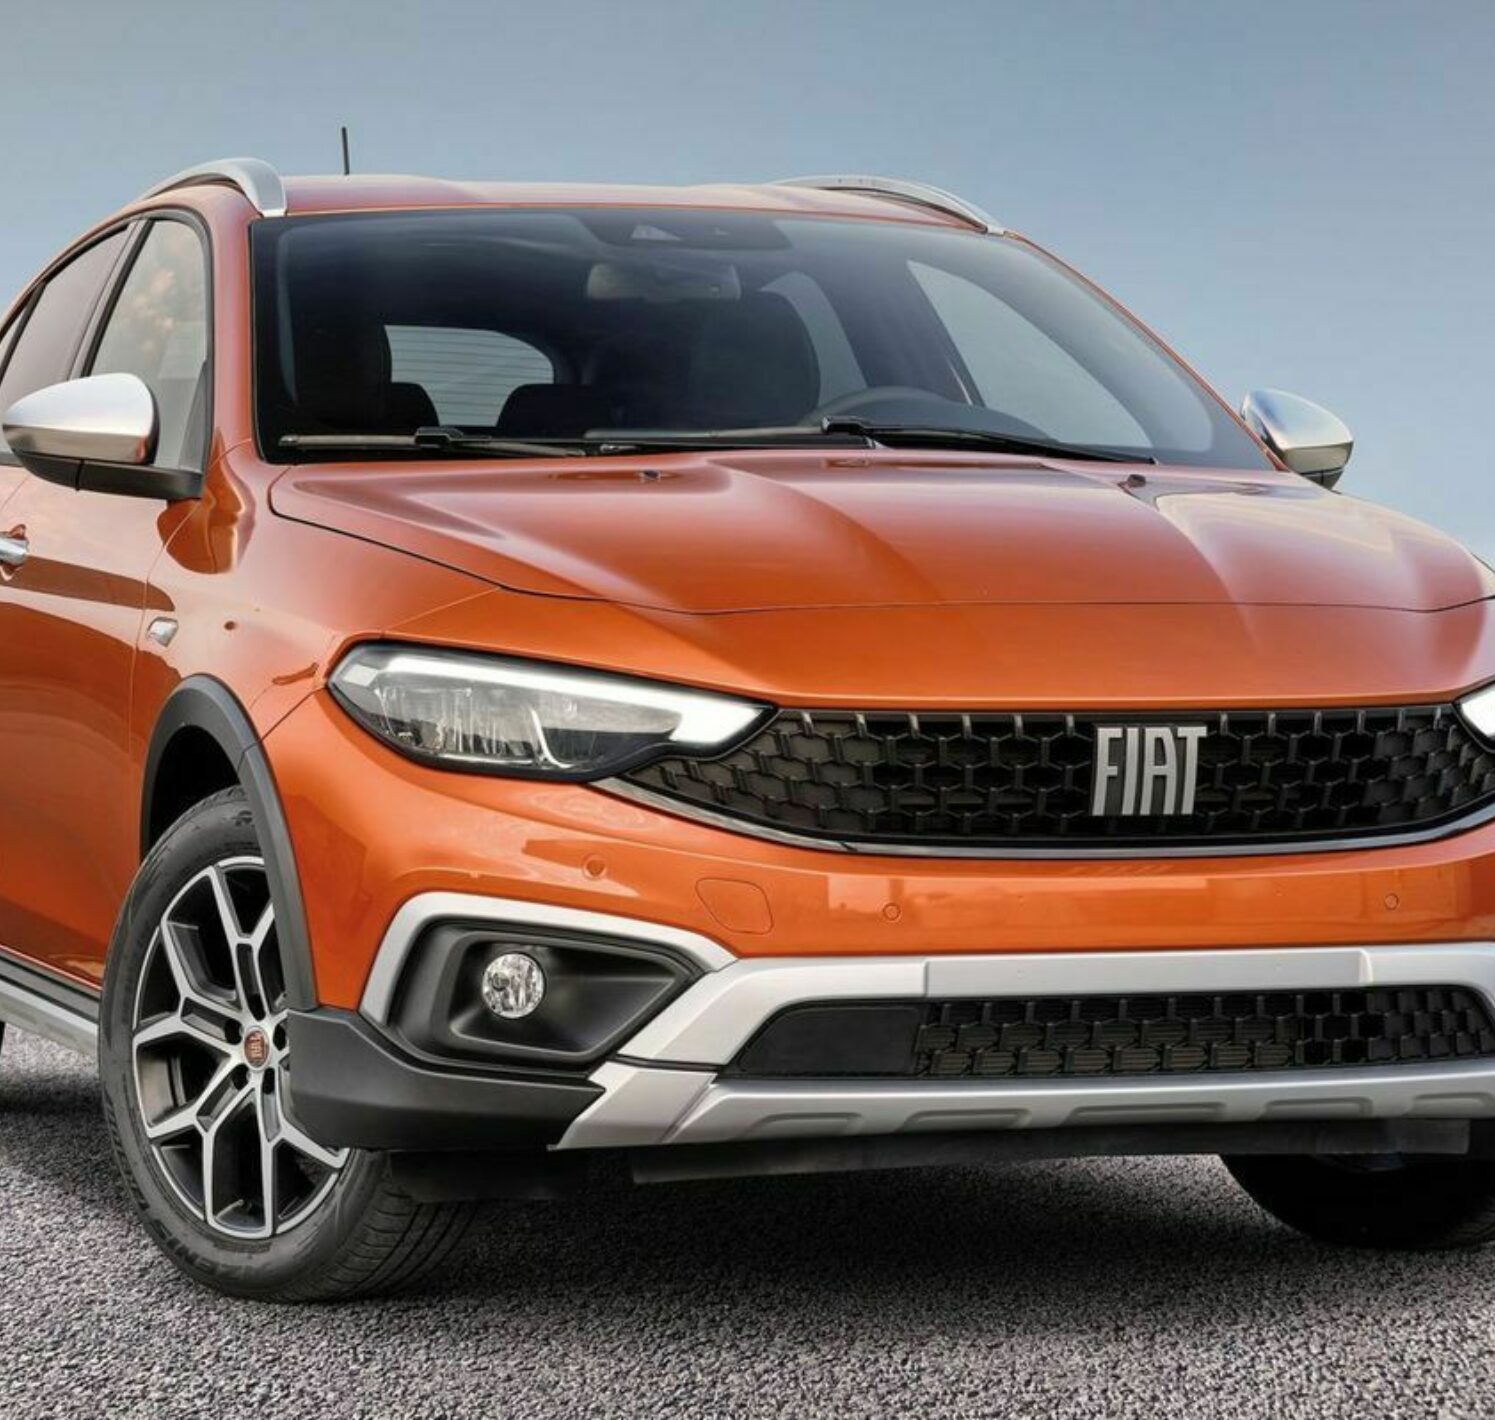 https://autofilter.sk/assets/images/tipo-2/gallery/fiat-tipo-cross-2021_05-galeria.jpg - obrazok